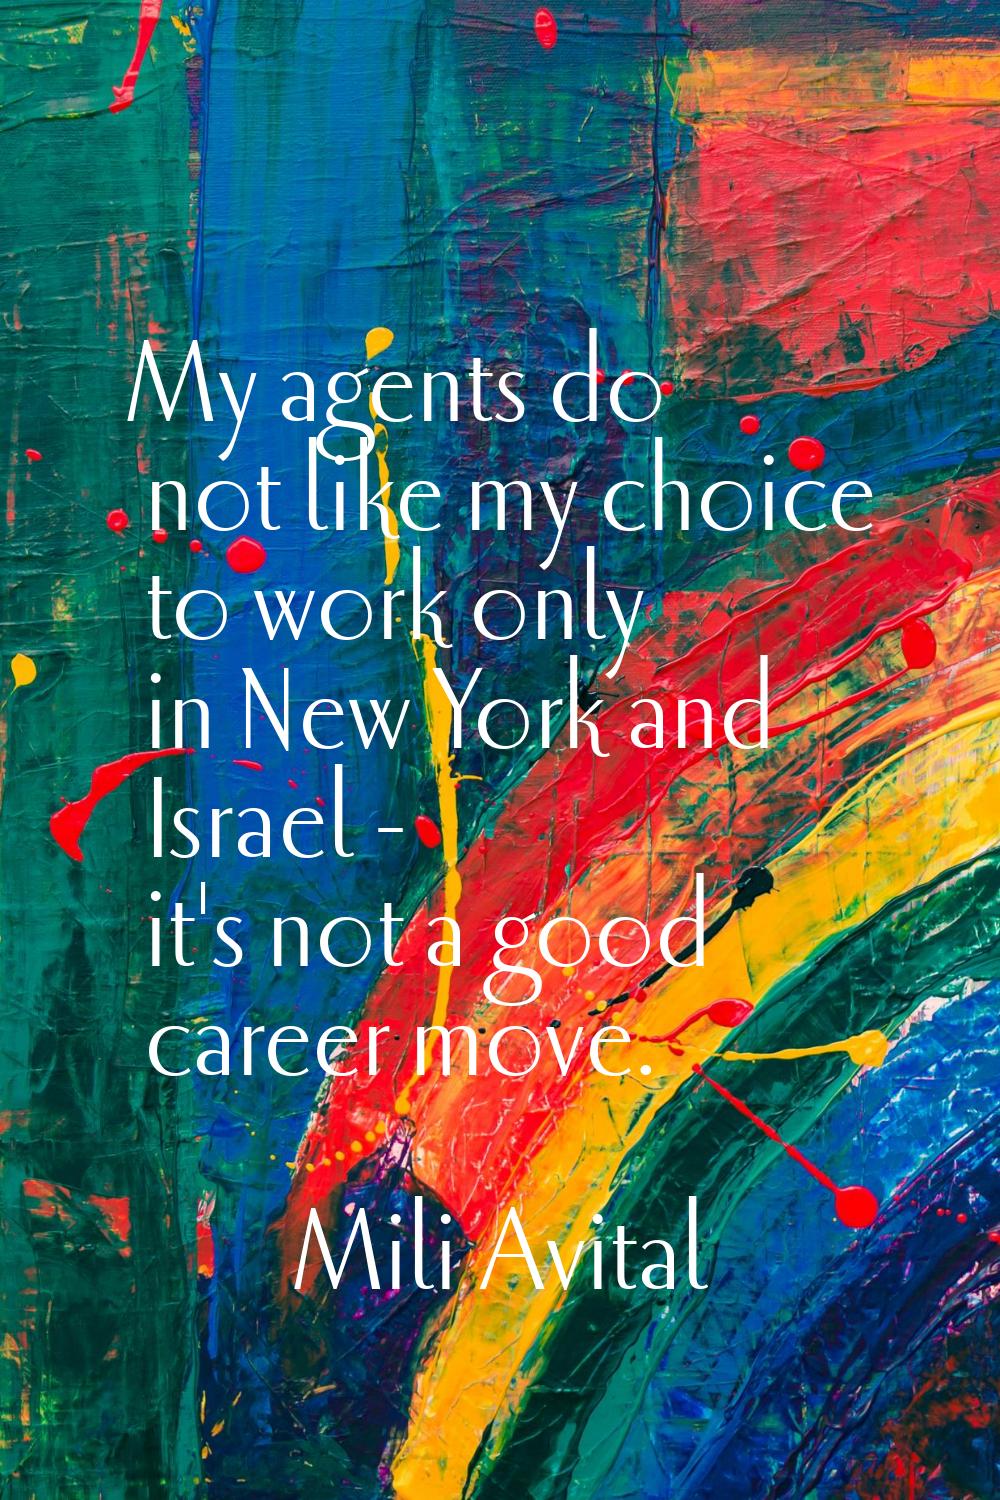 My agents do not like my choice to work only in New York and Israel - it's not a good career move.